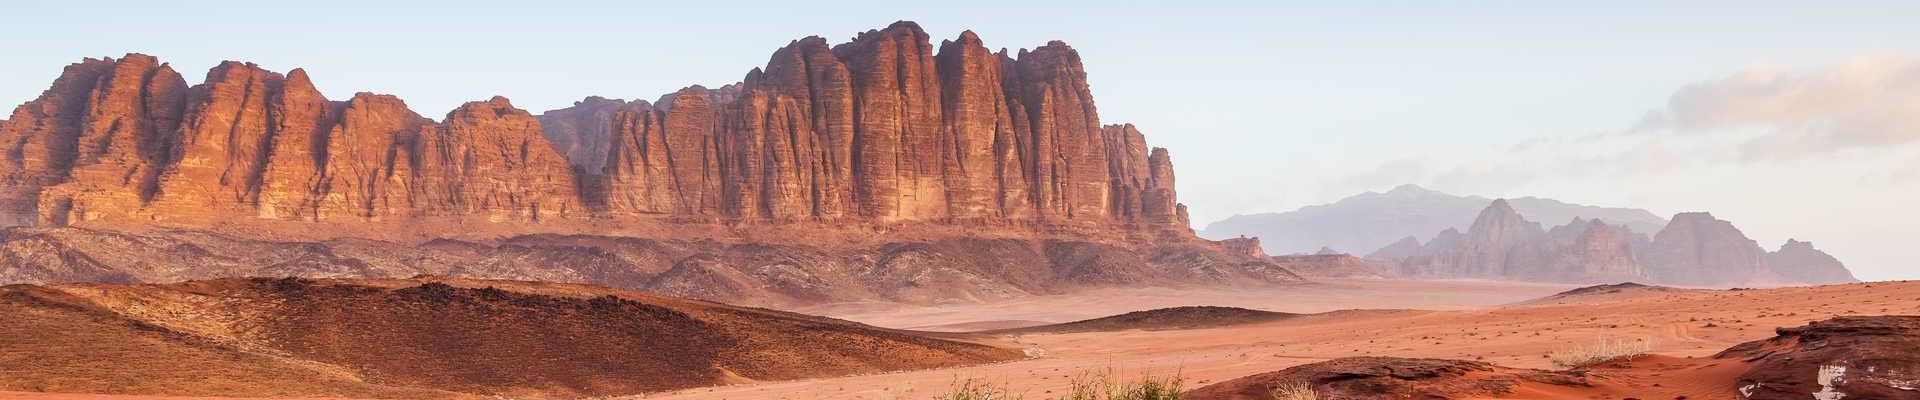 Go Jordan Travel and Tourism Launches New Jordan Tour Packages, Unveiling the Wonders of the Ancient Land